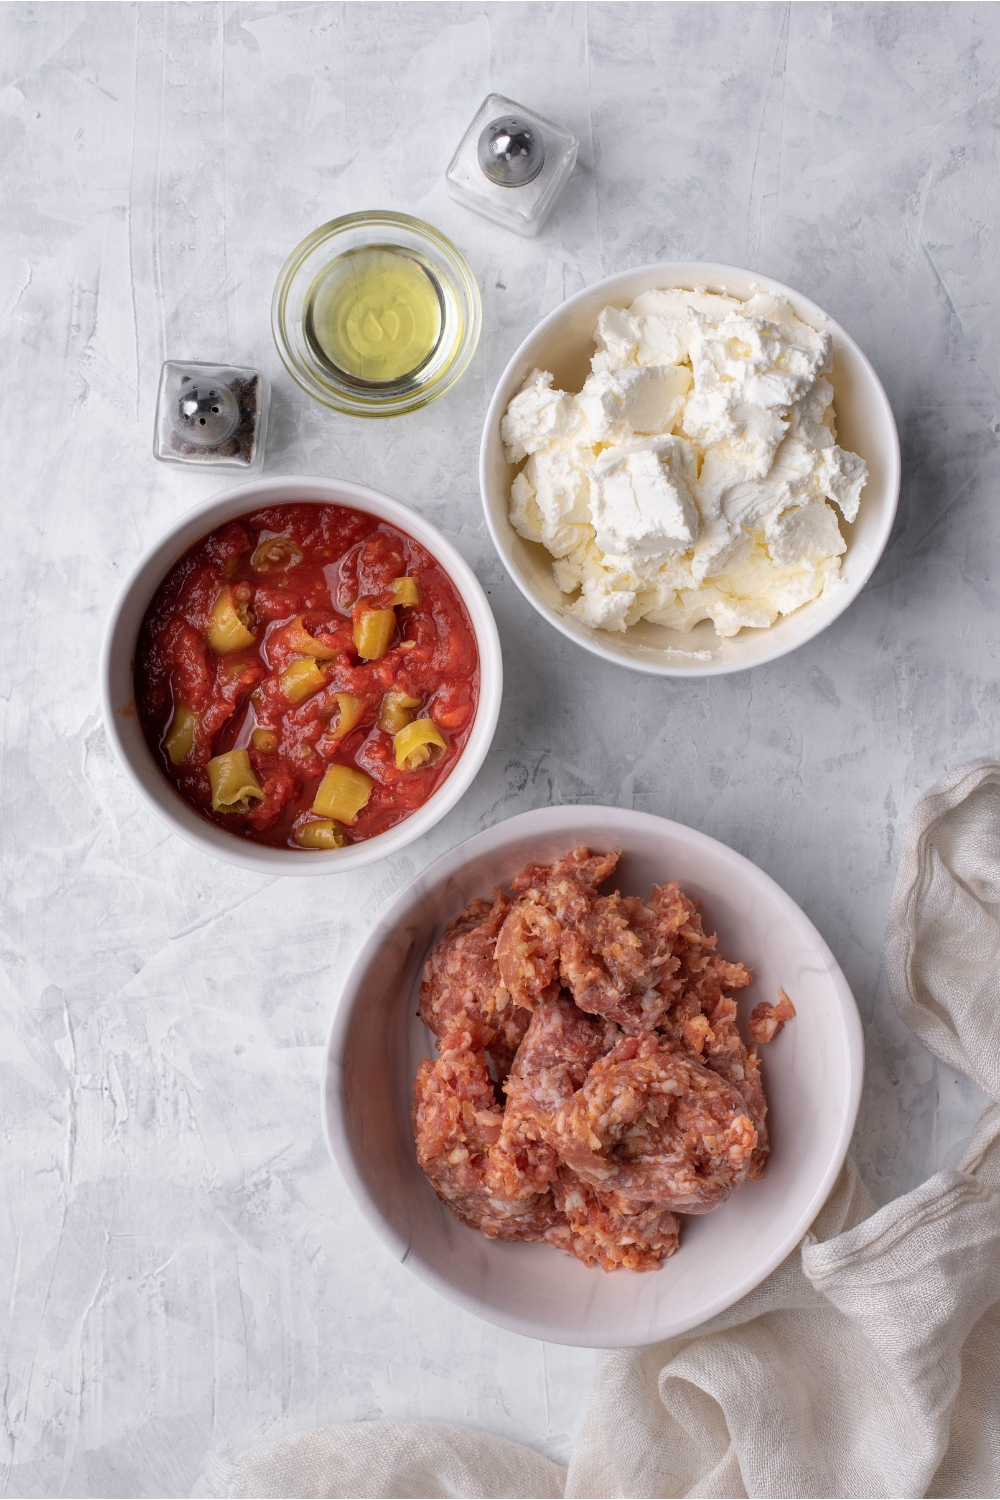 An assortment of ingredients including bowls of cream cheese, crushed tomatoes, and raw ground beef.